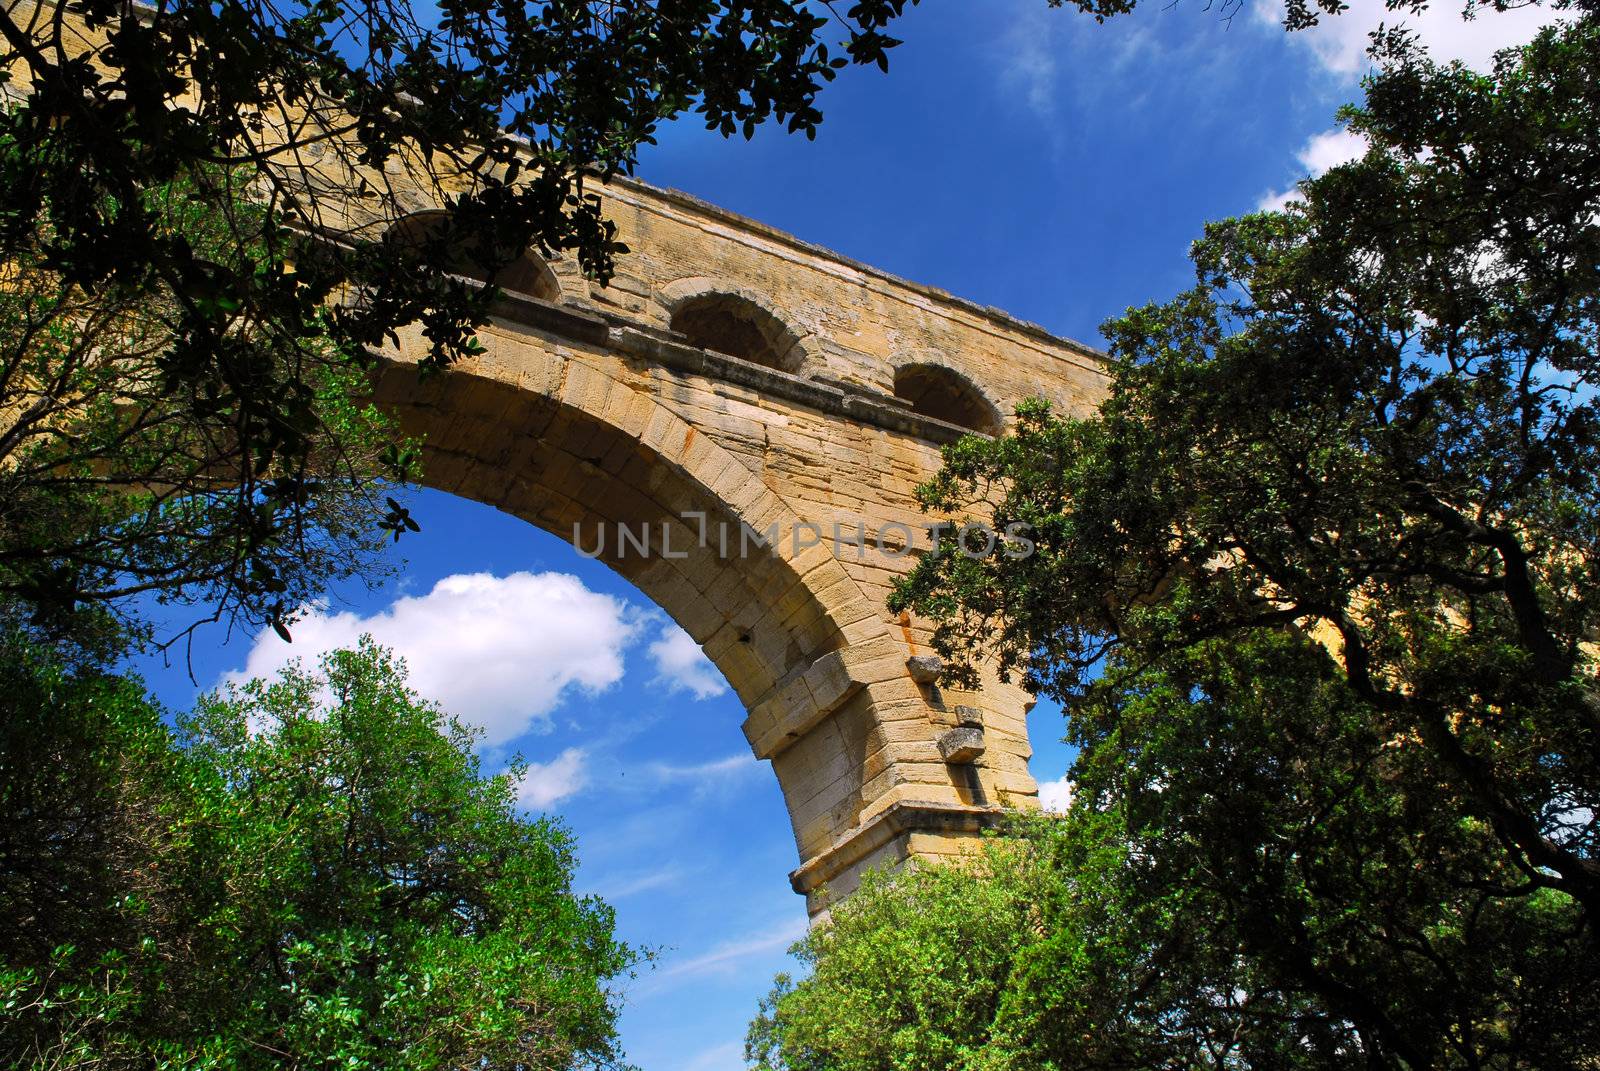 Pont du Gard in southern France by elenathewise